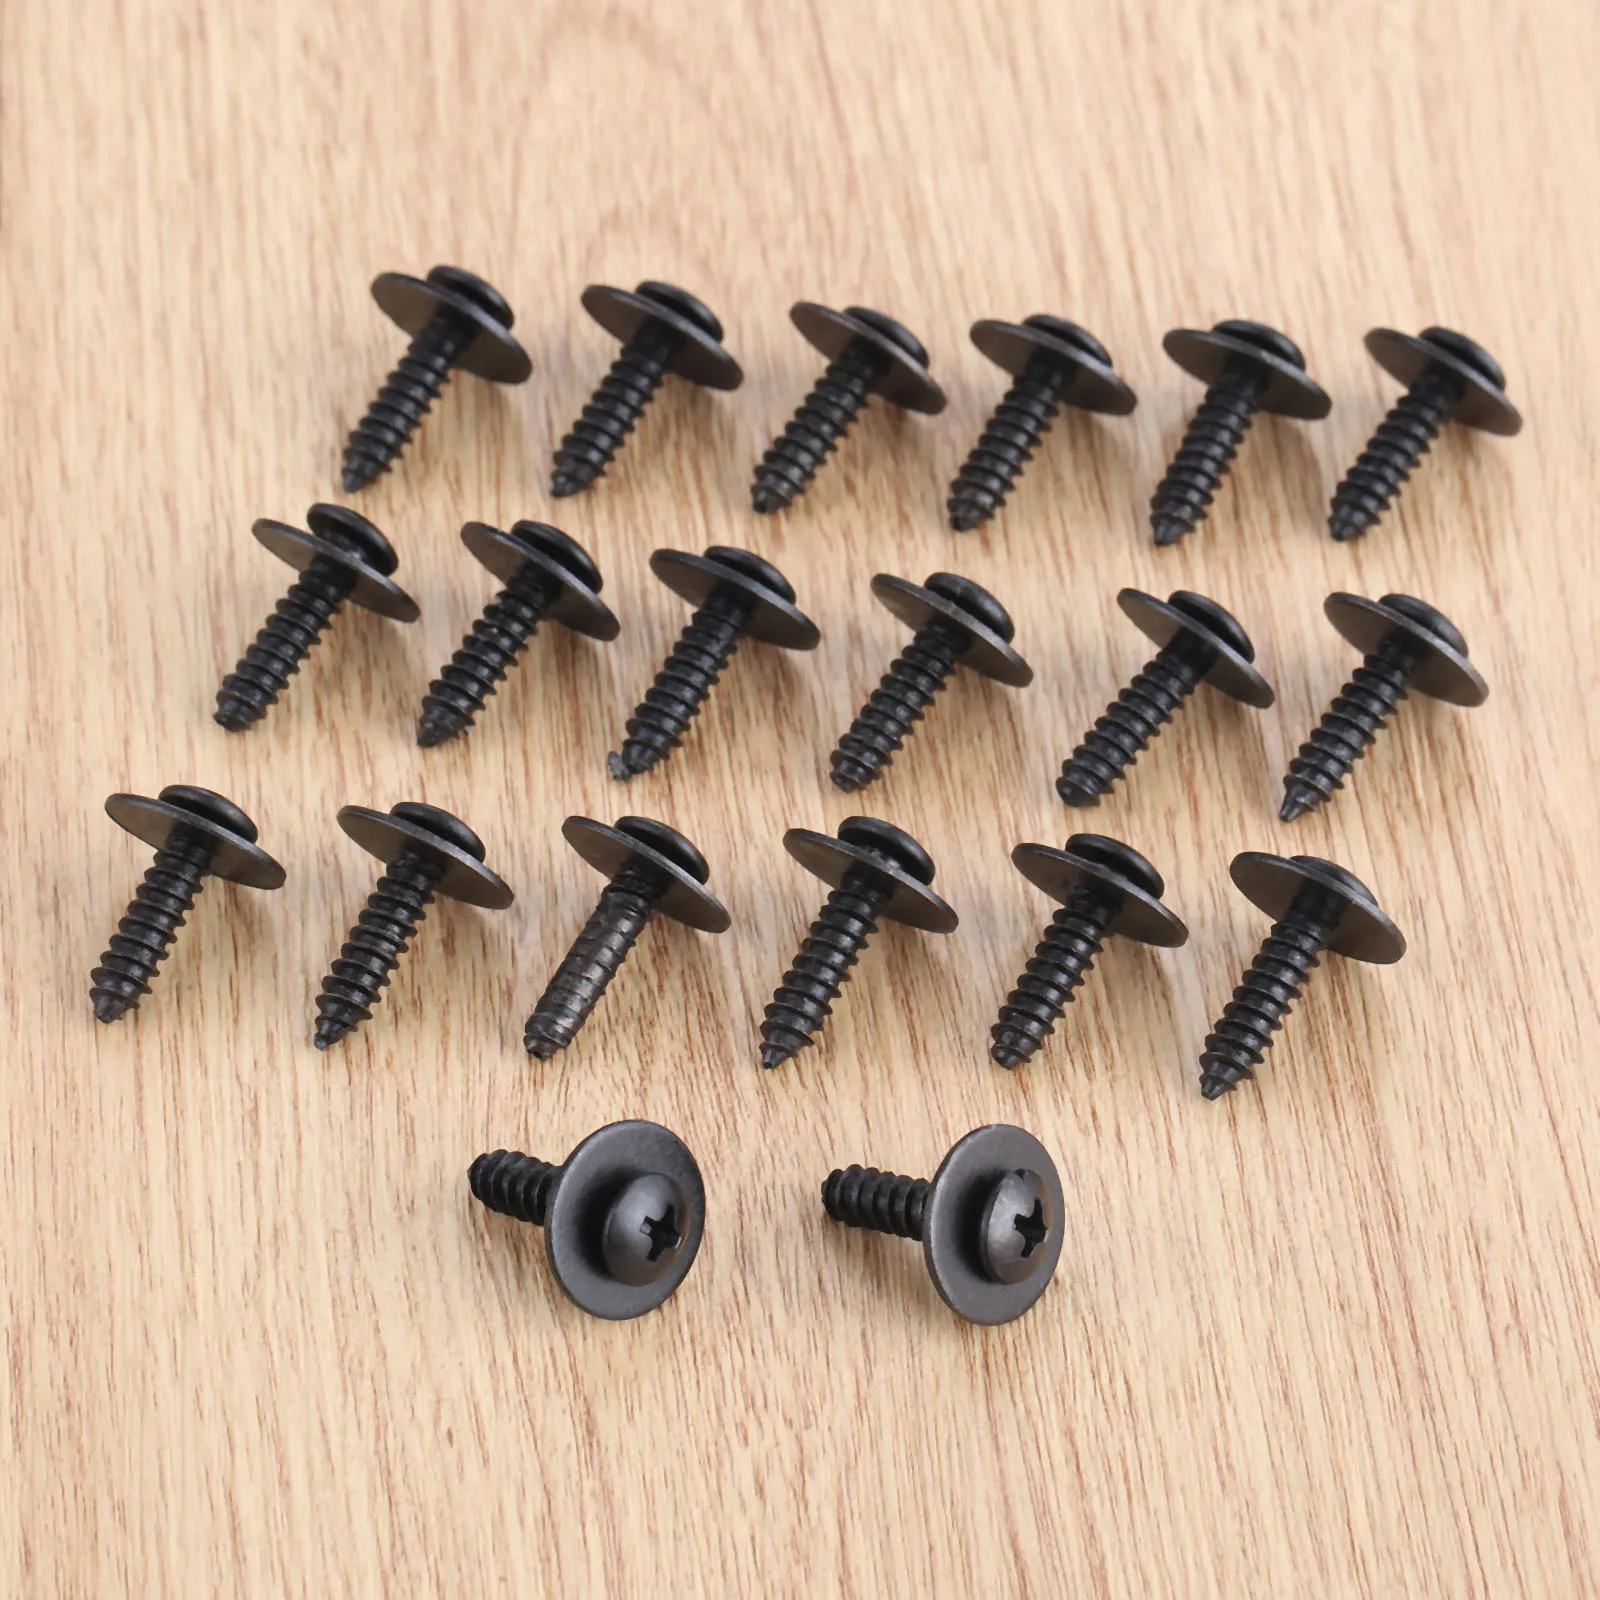 Details about   50x Car SUV Repair Screws Body Fender Bumper Clips 8mm Hex Washer Head Universal 